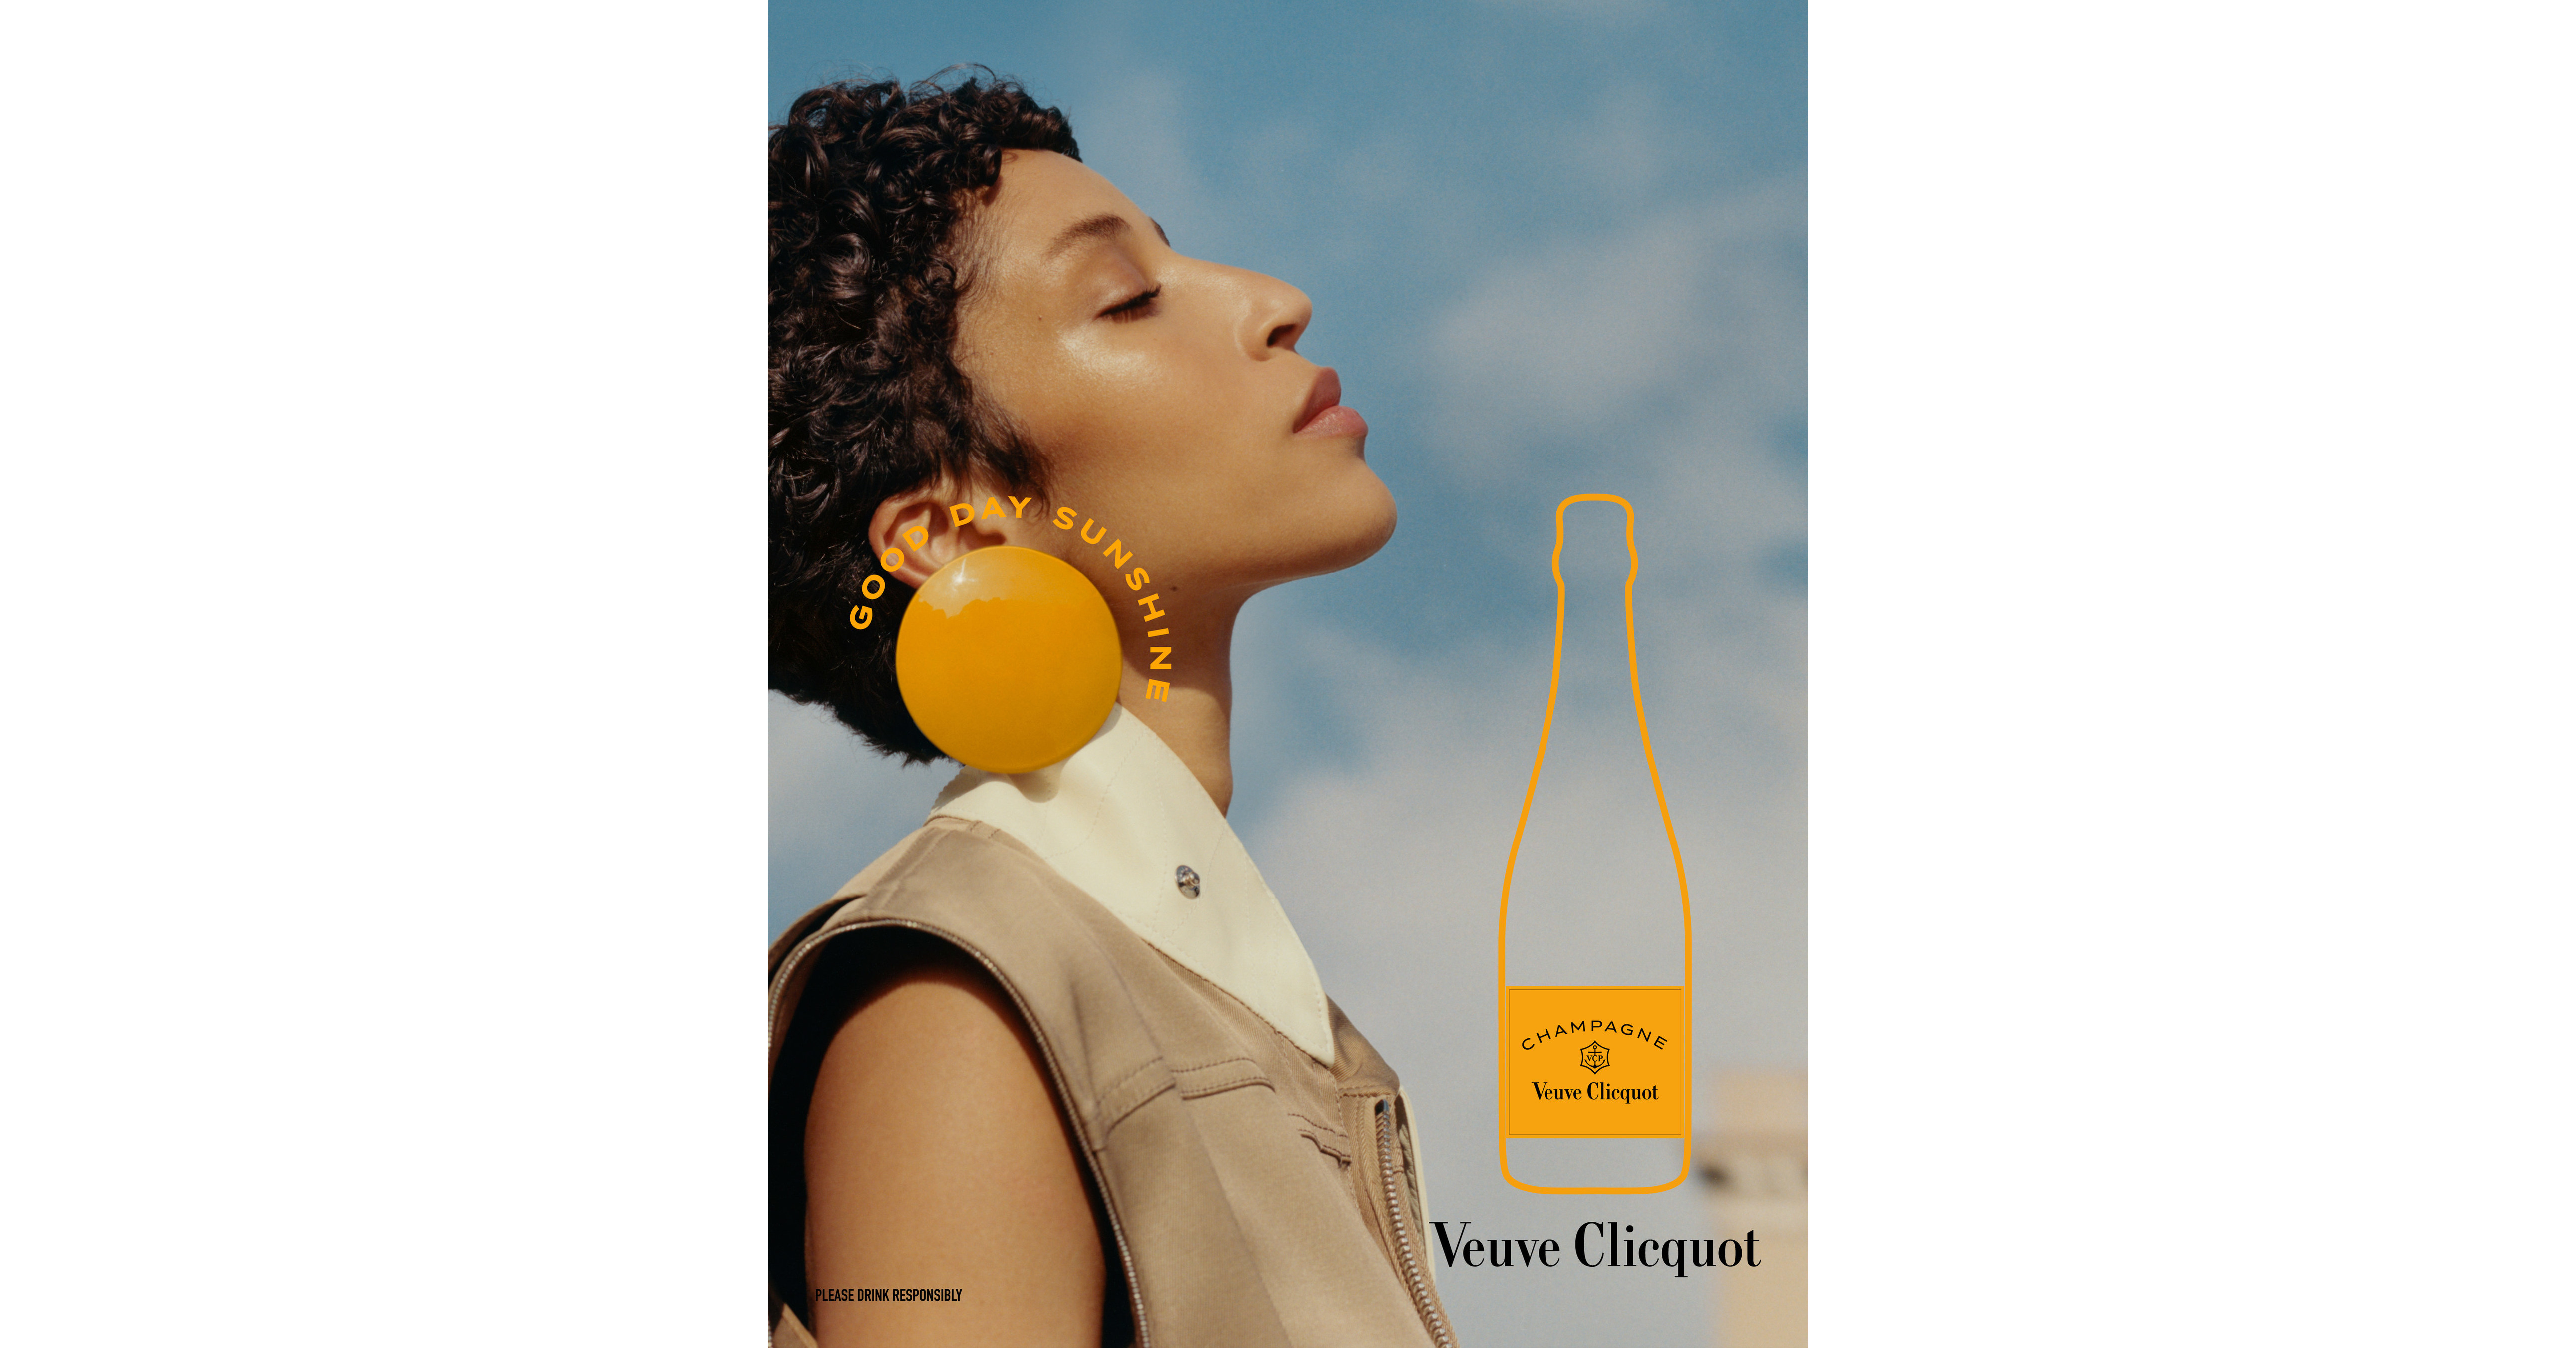 Veuve Clicquot gets fashionable new image - Duty Free Hunter